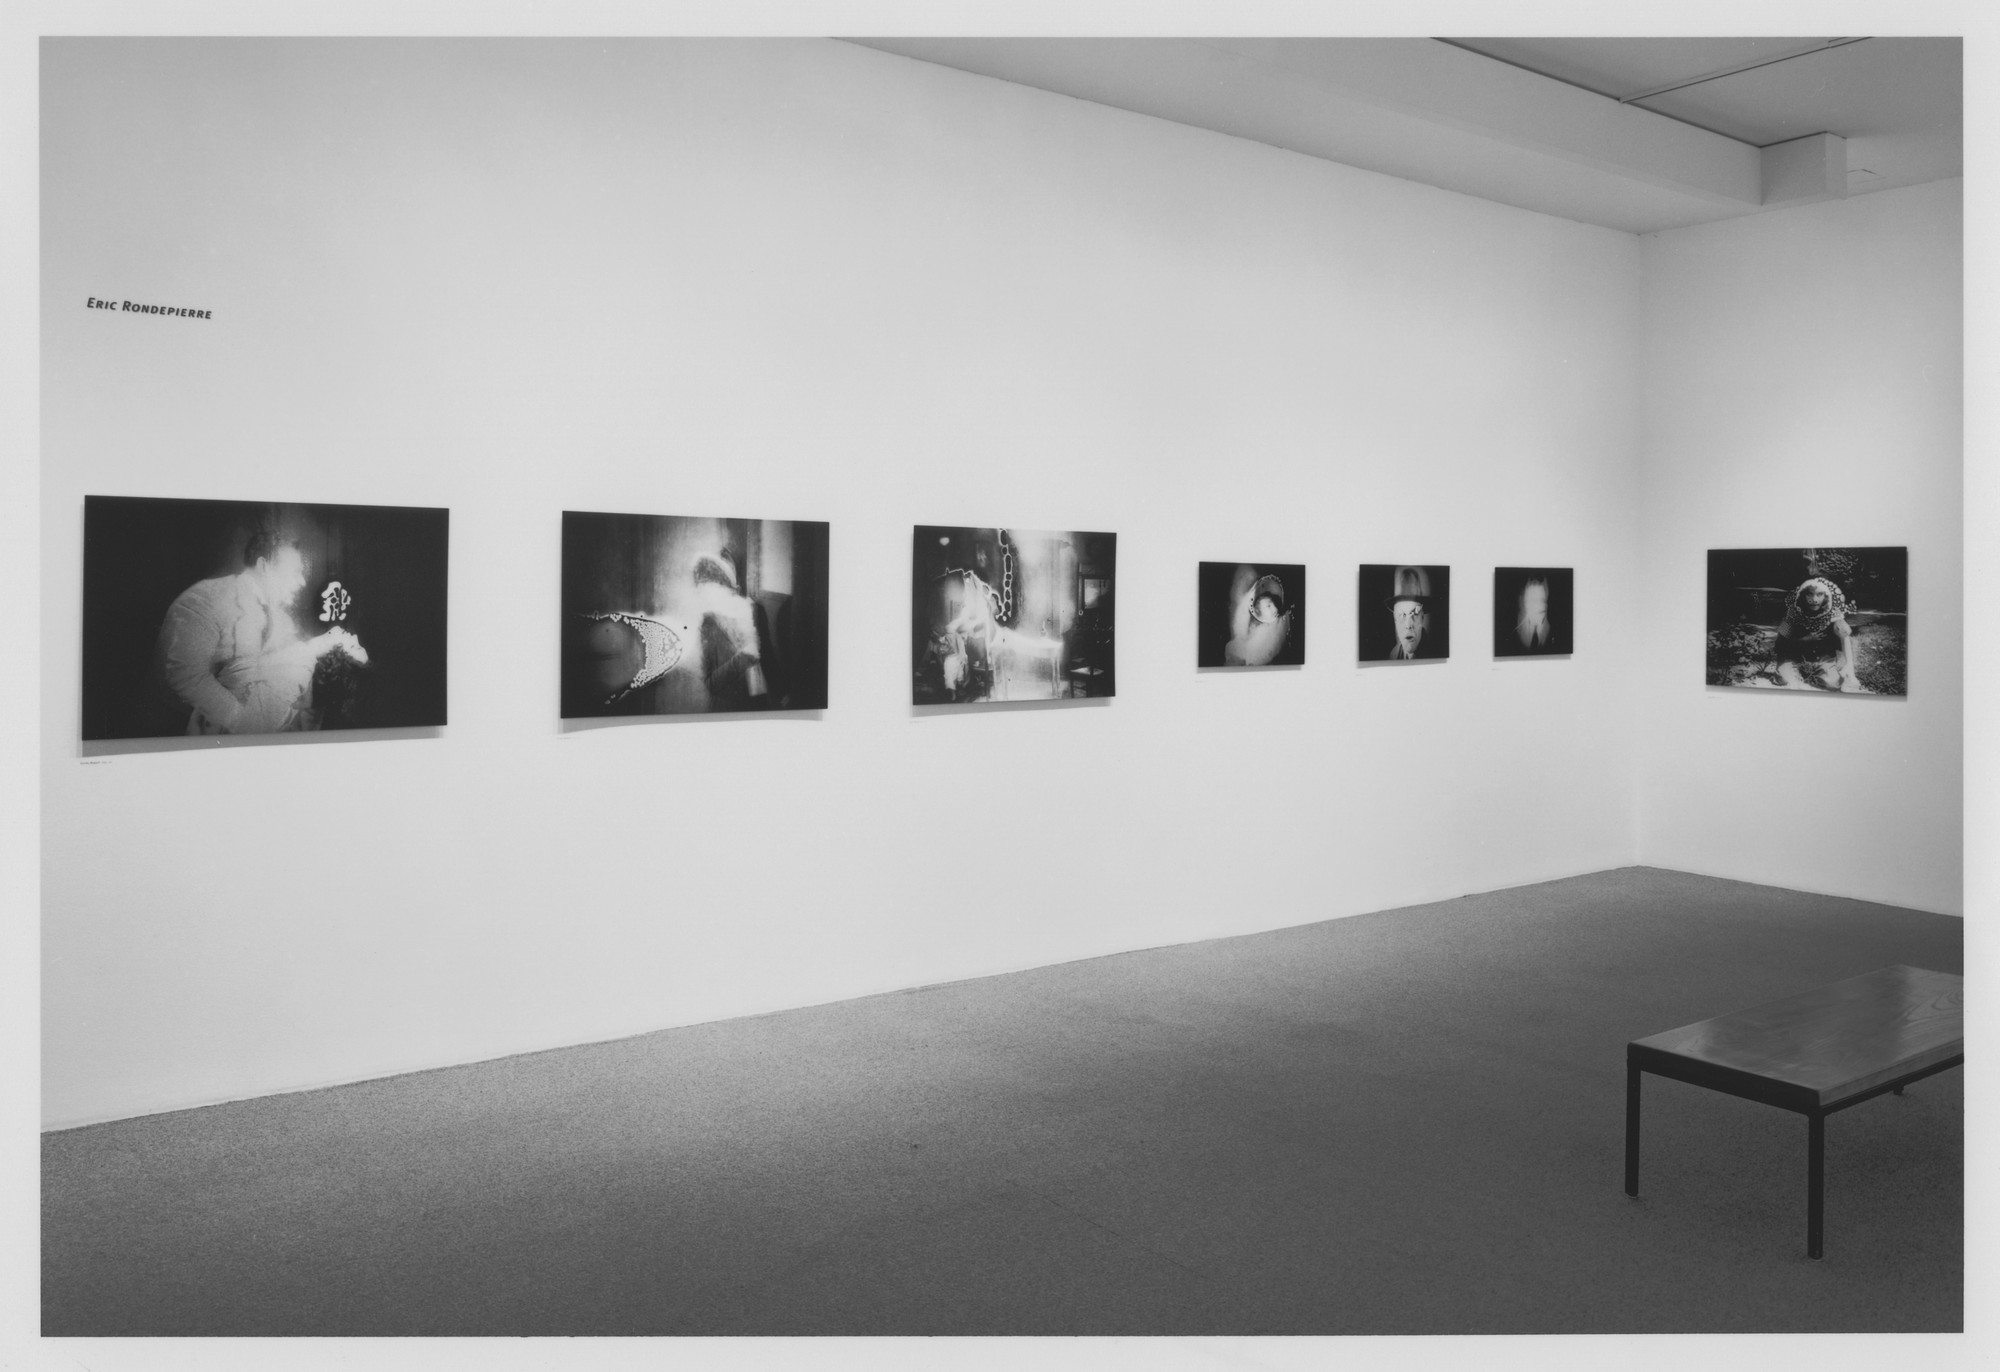 Installation of the exhibition, "New Photography 11" | MoMA